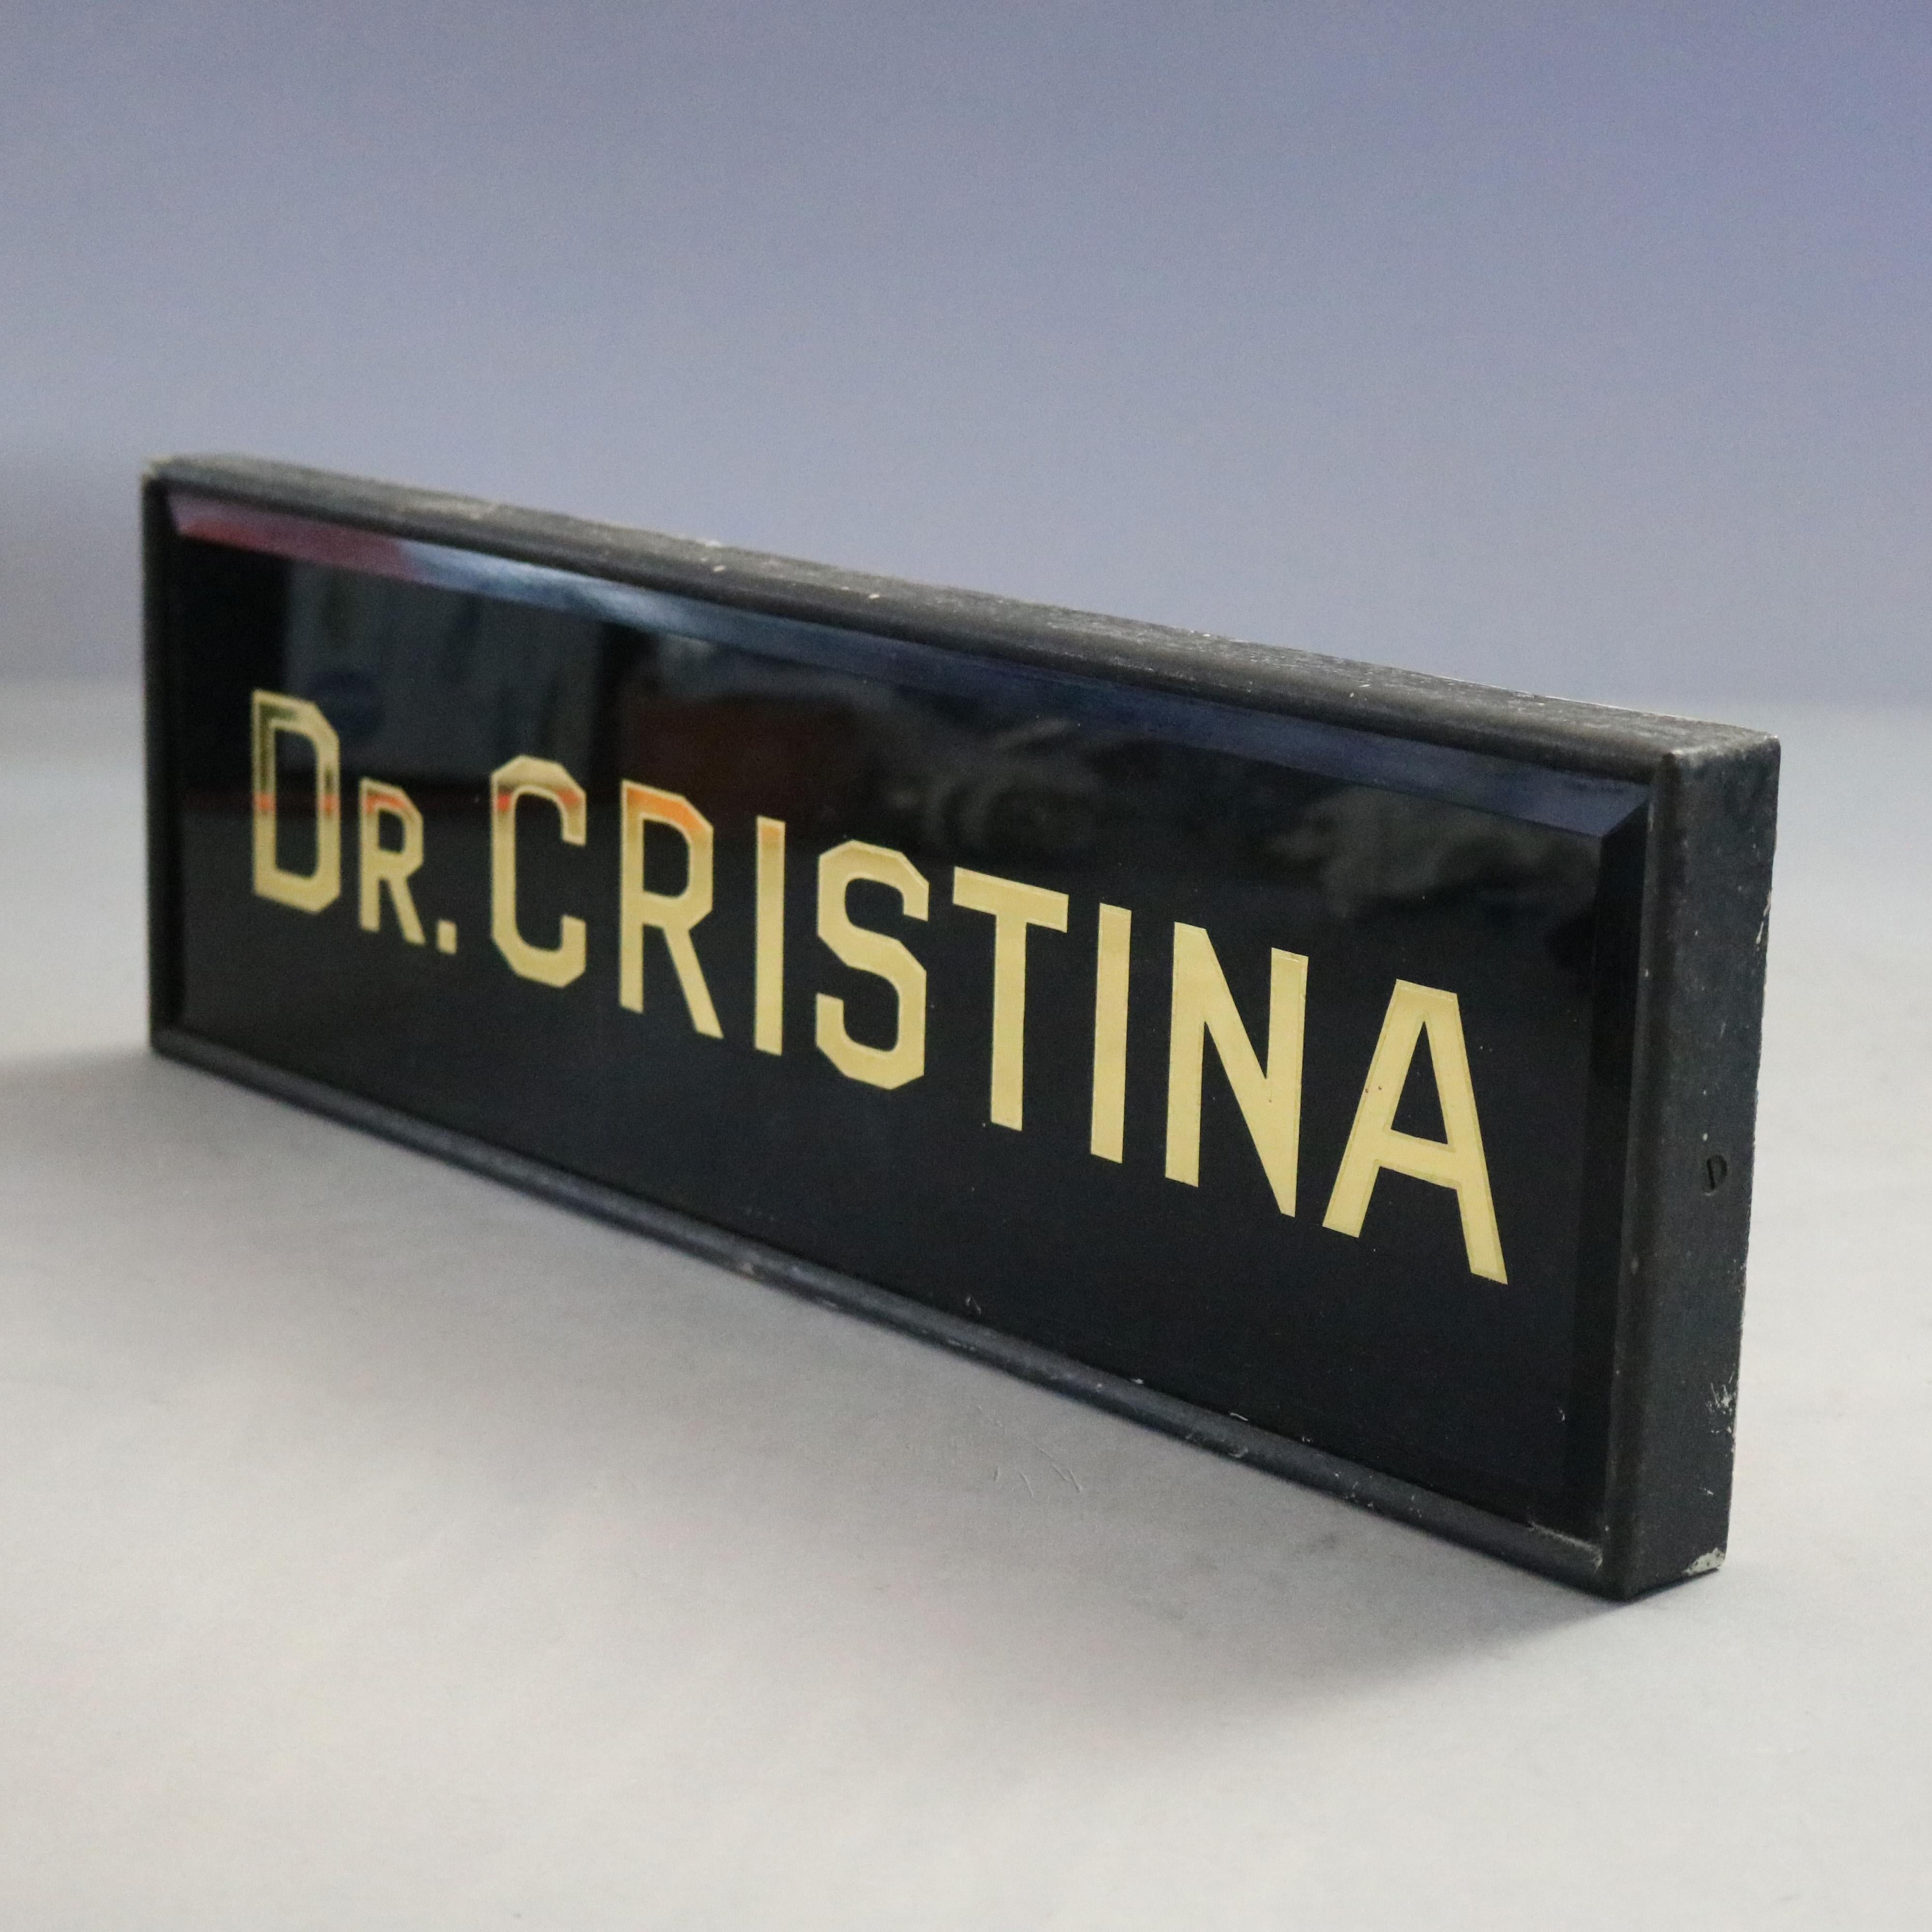 Antique Victorian medial physician's office sign offers ebonized painted glass with gilt lettering 